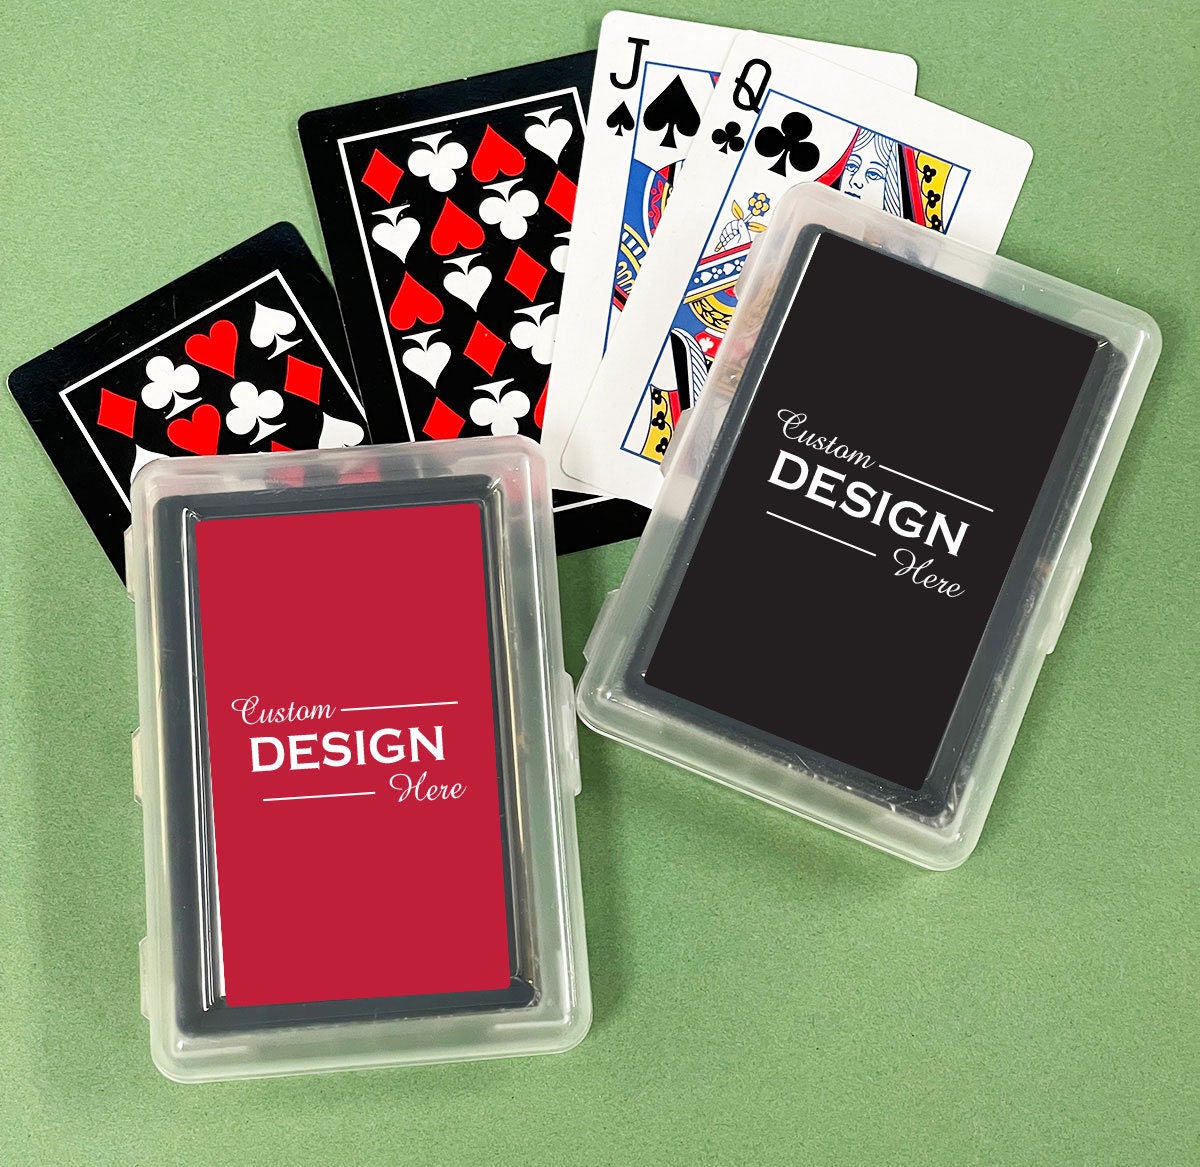 Display a Now Playing card